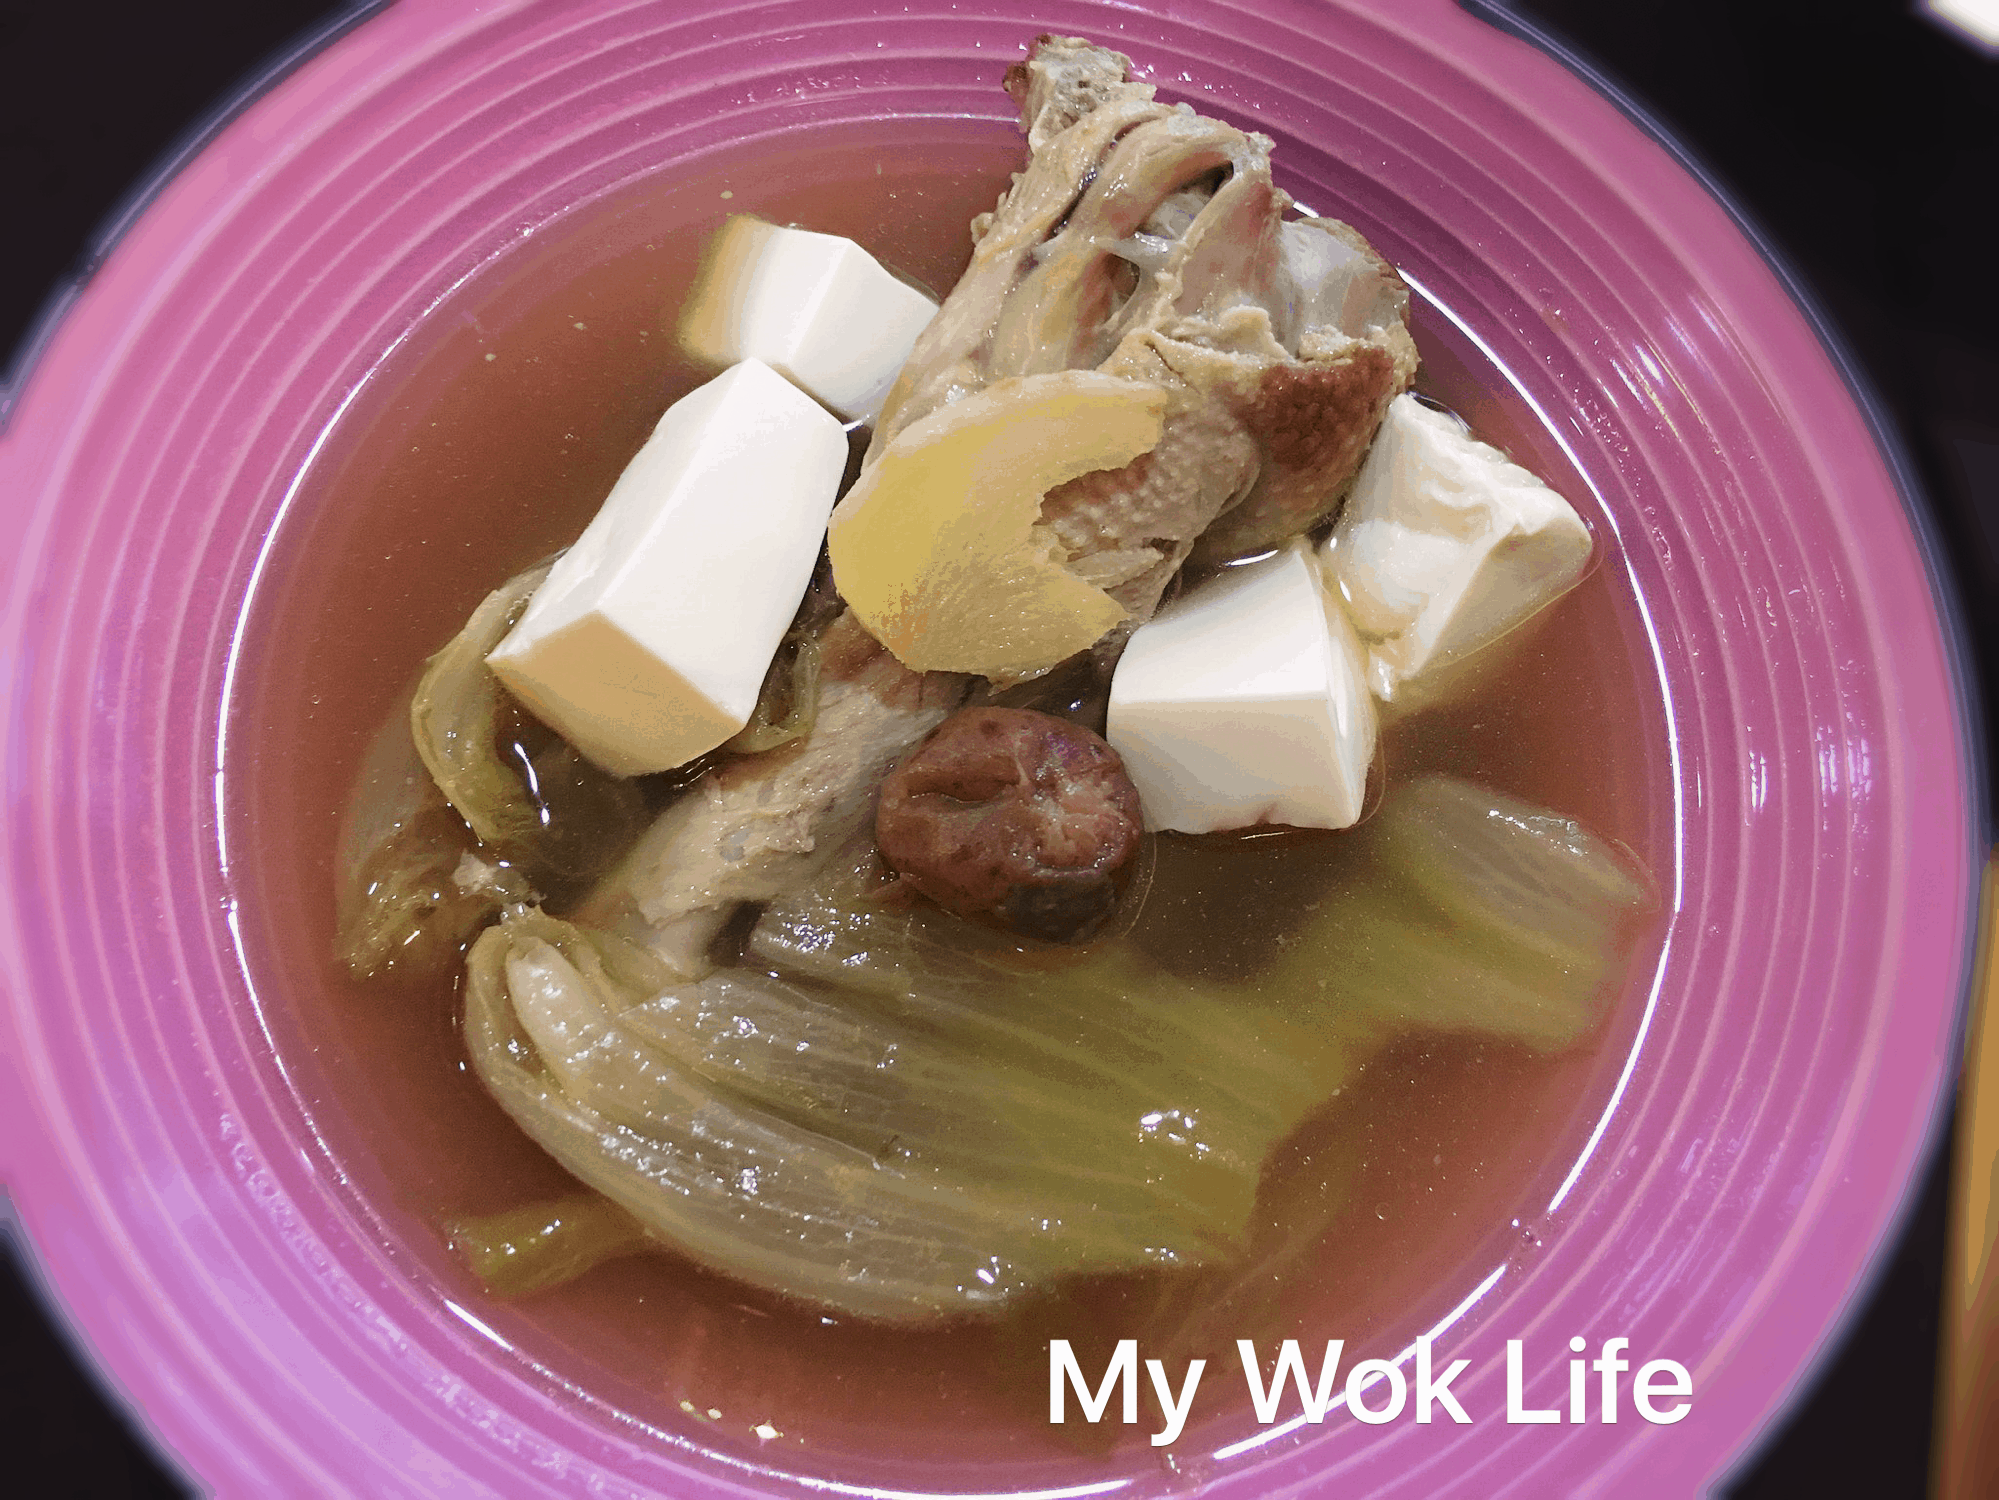 My Wok Life Cooking Blog Duck Soup with Salted Vegetable & Tofu (咸菜豆腐鸭汤)